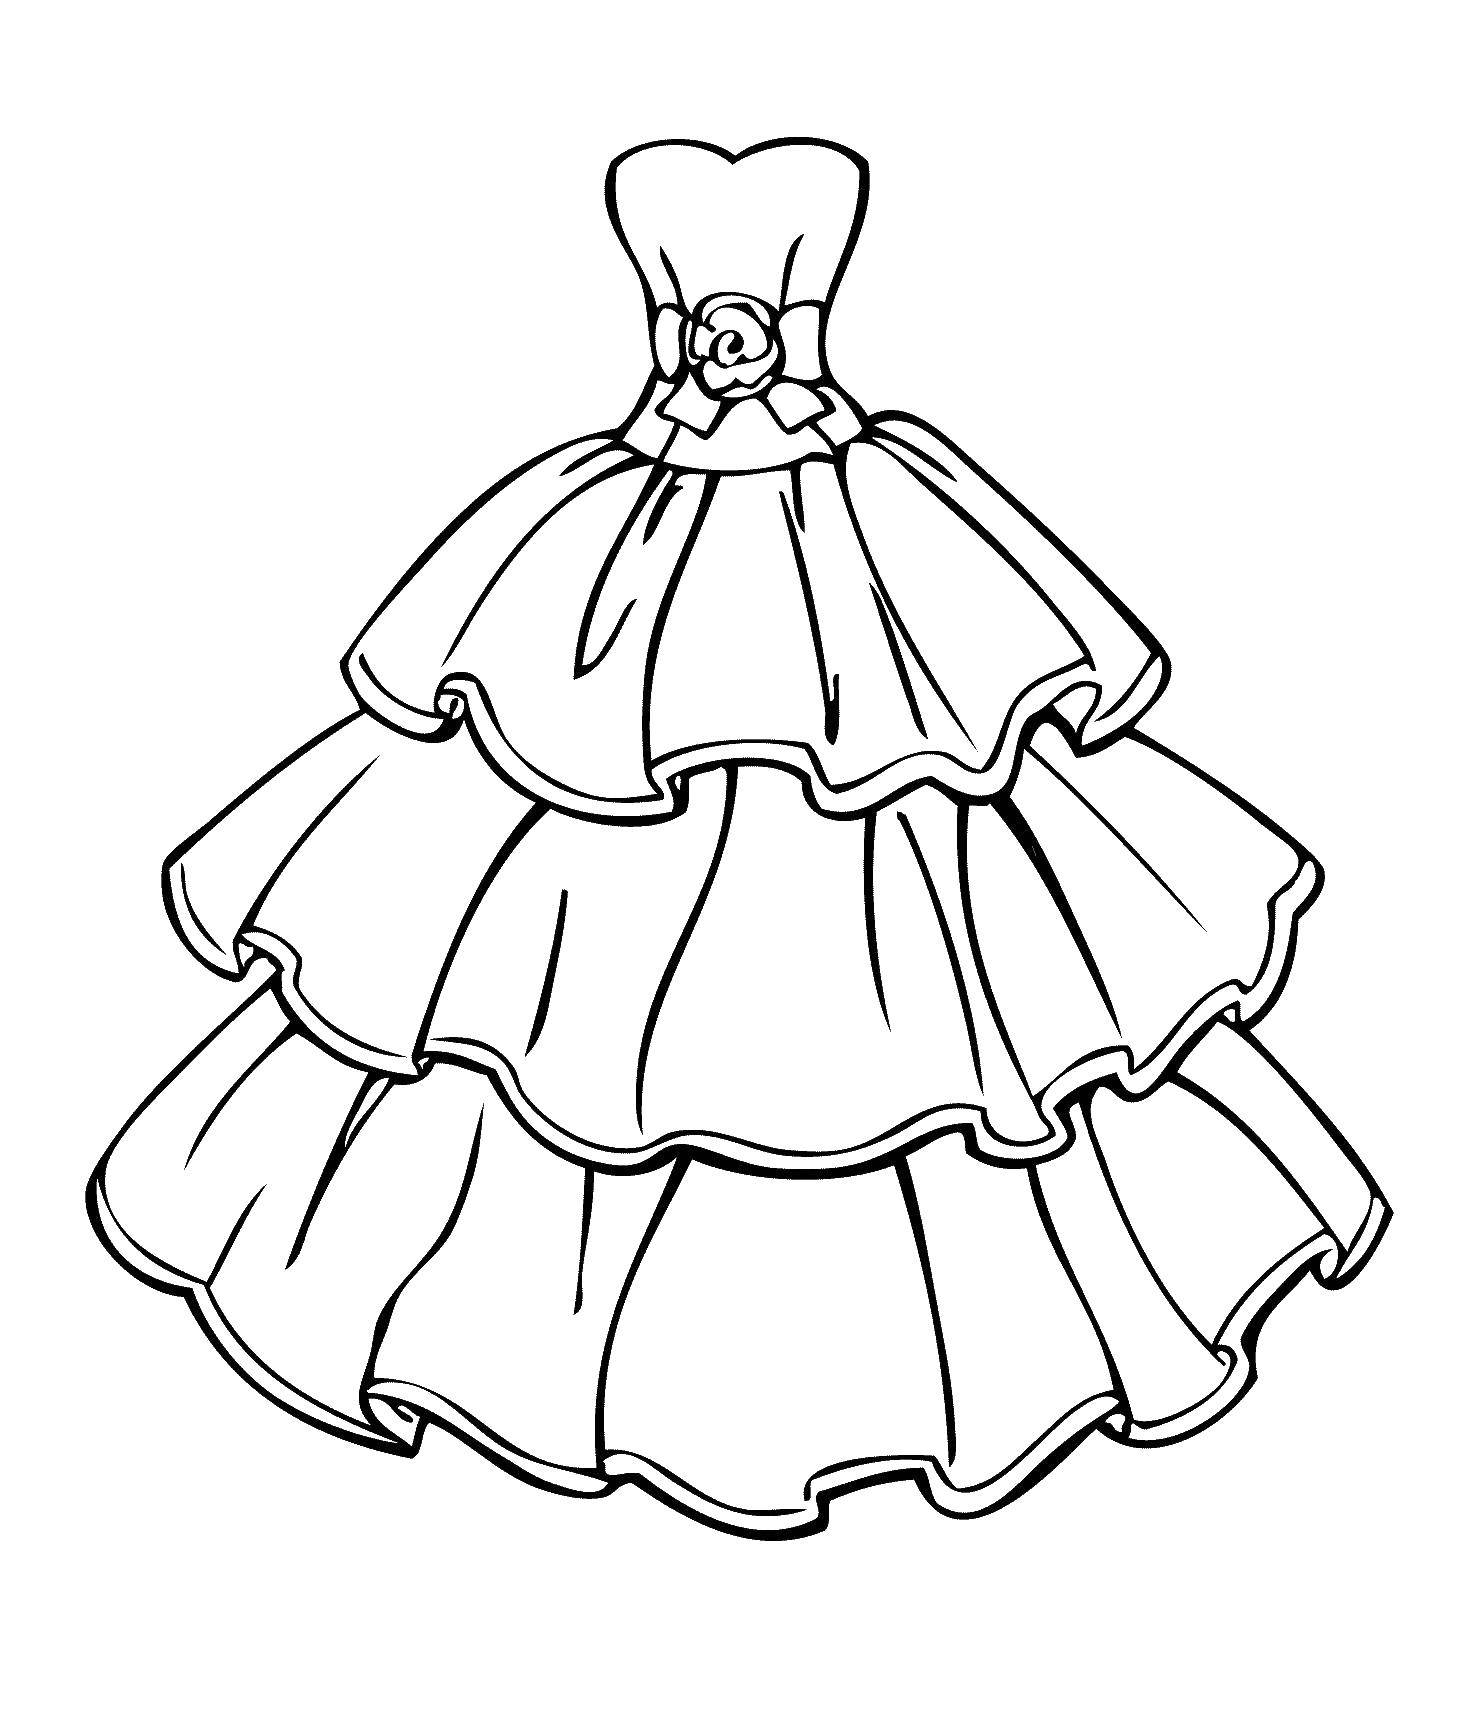 Coloring Quinceanera dresses with flower. Category clothing. Tags:  Clothing, dress, flower.